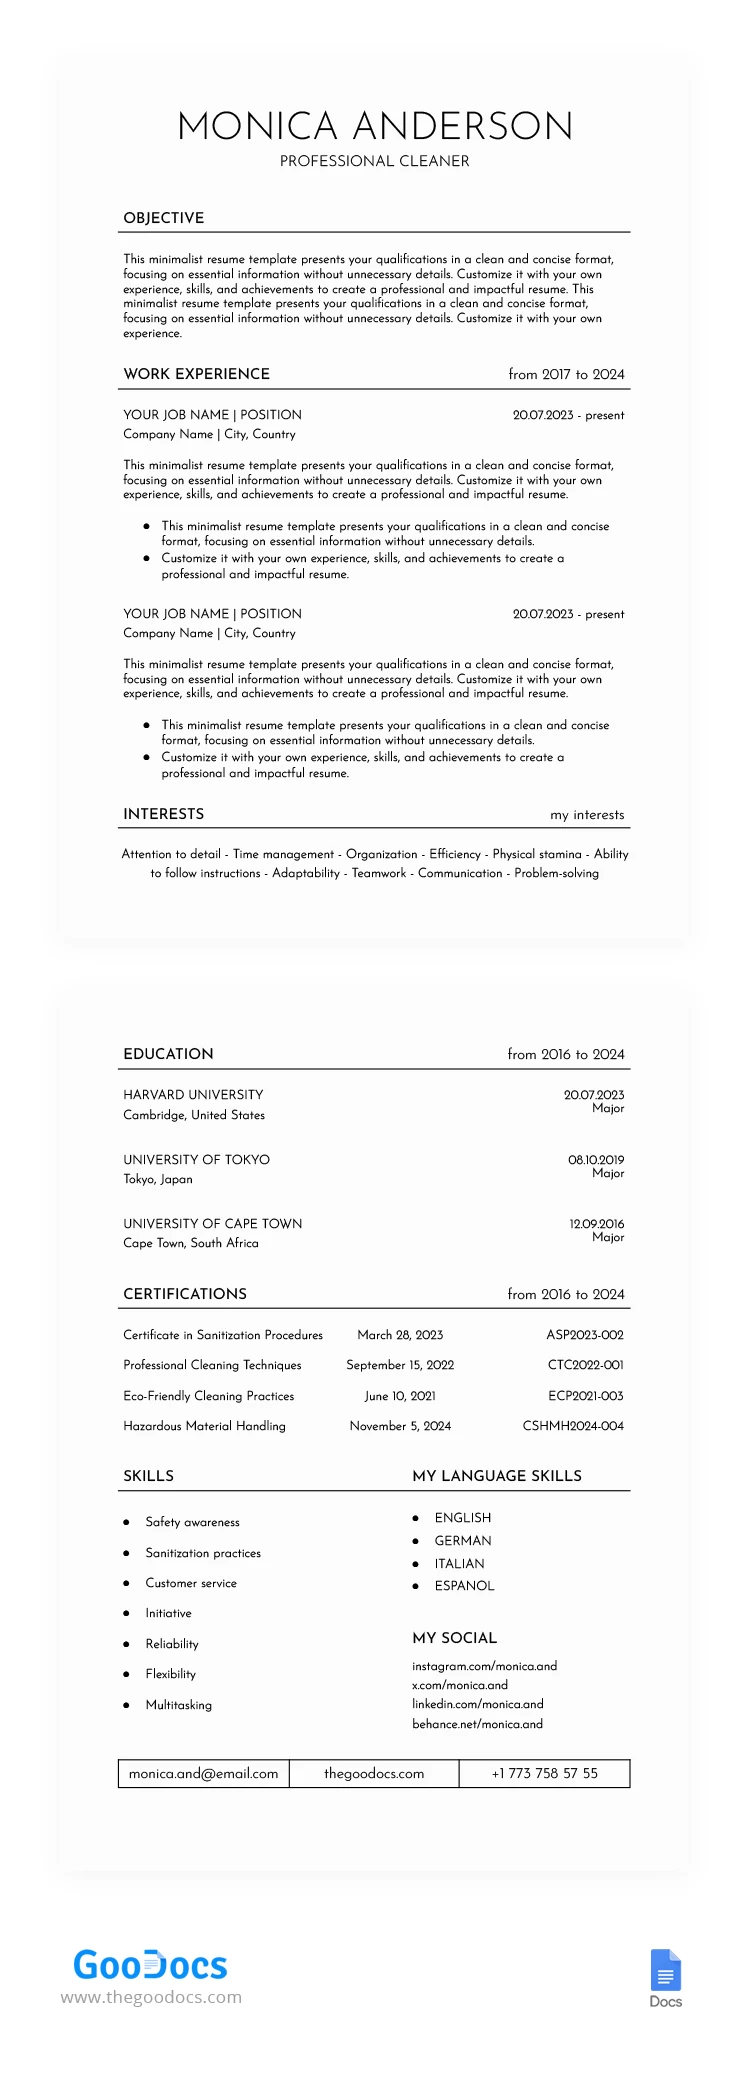 Clean Resume and CV - free Google Docs Template - 10068570